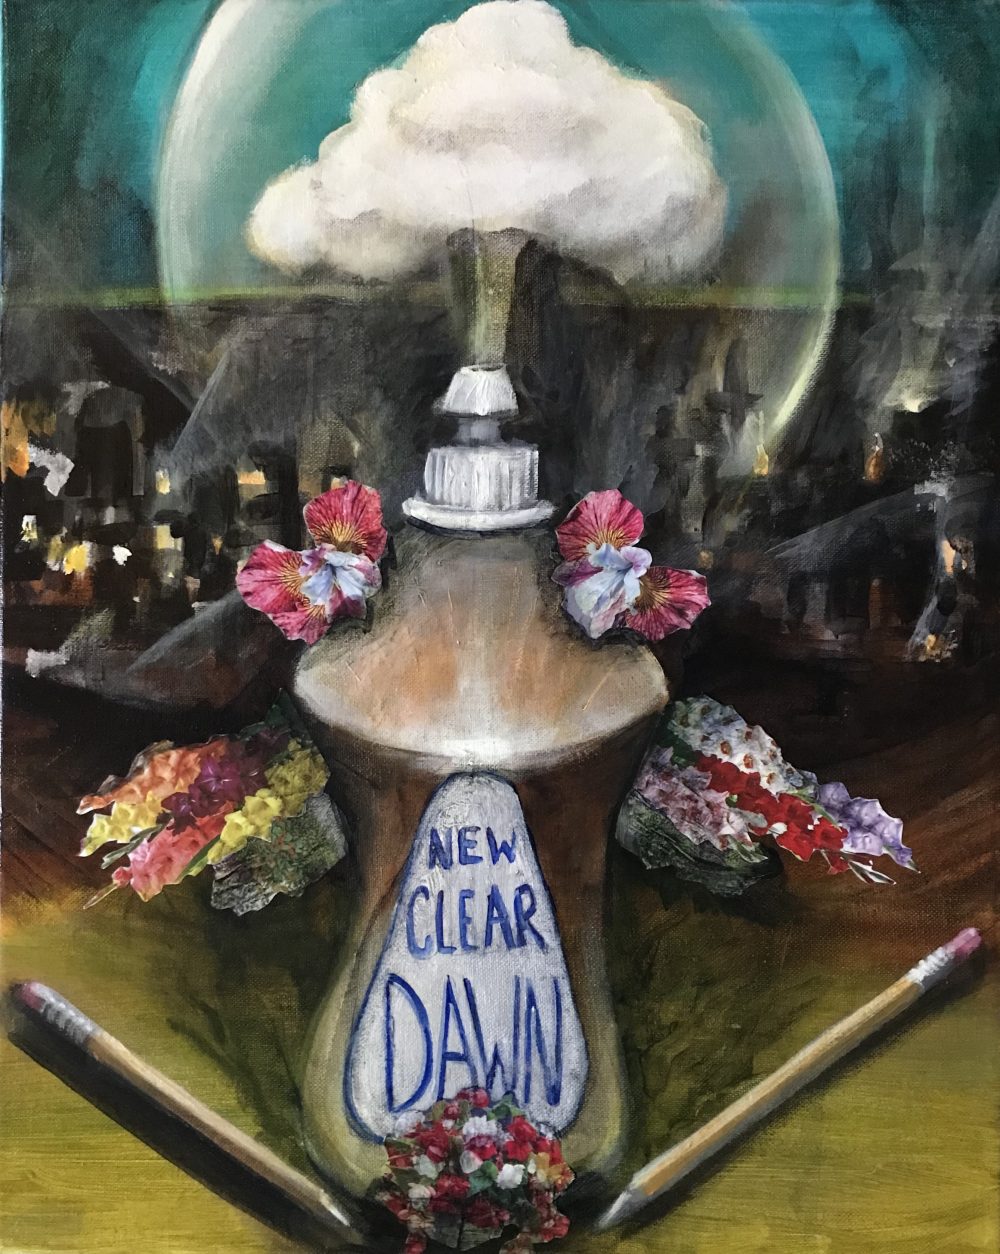 A dark mixed media painting of a bottle of Dawn dish soap in an apocalyptic landscape.